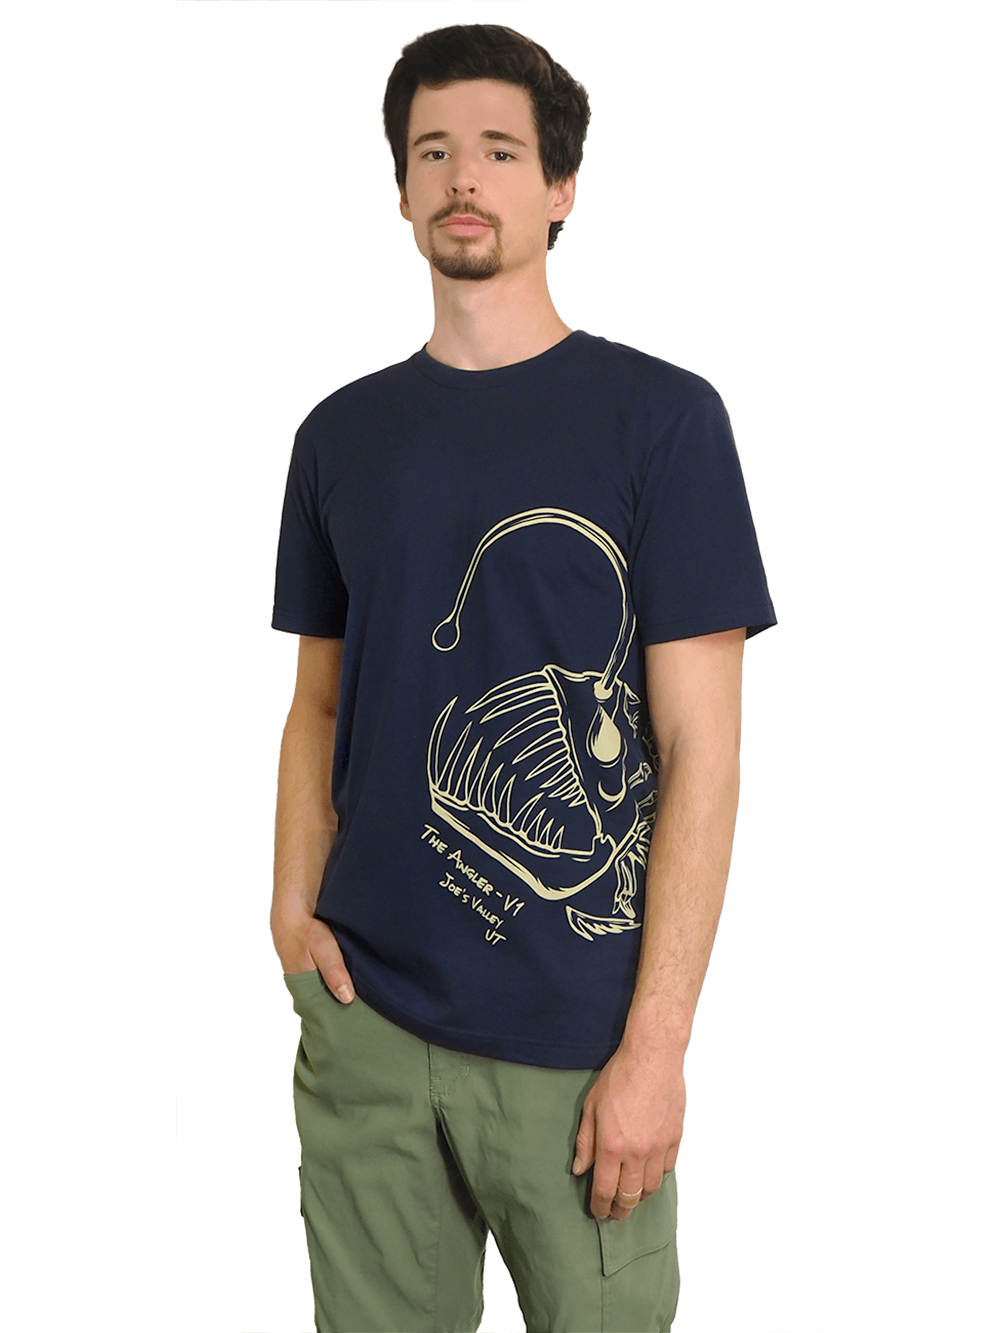 https://www.flashed.com/wp-content/uploads/2021/10/Mens-Front-New.png